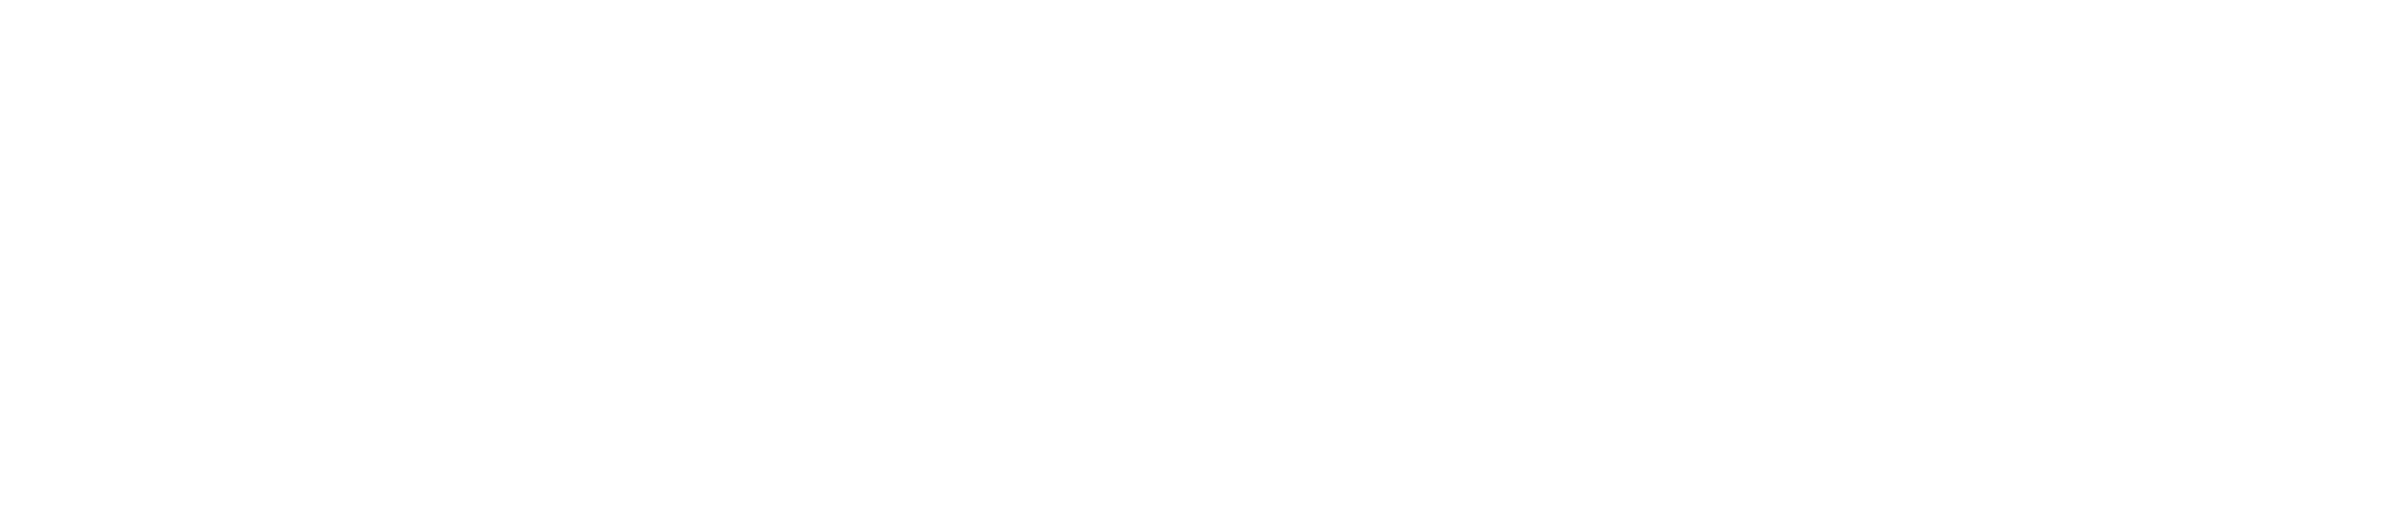 VES Specialists Logo